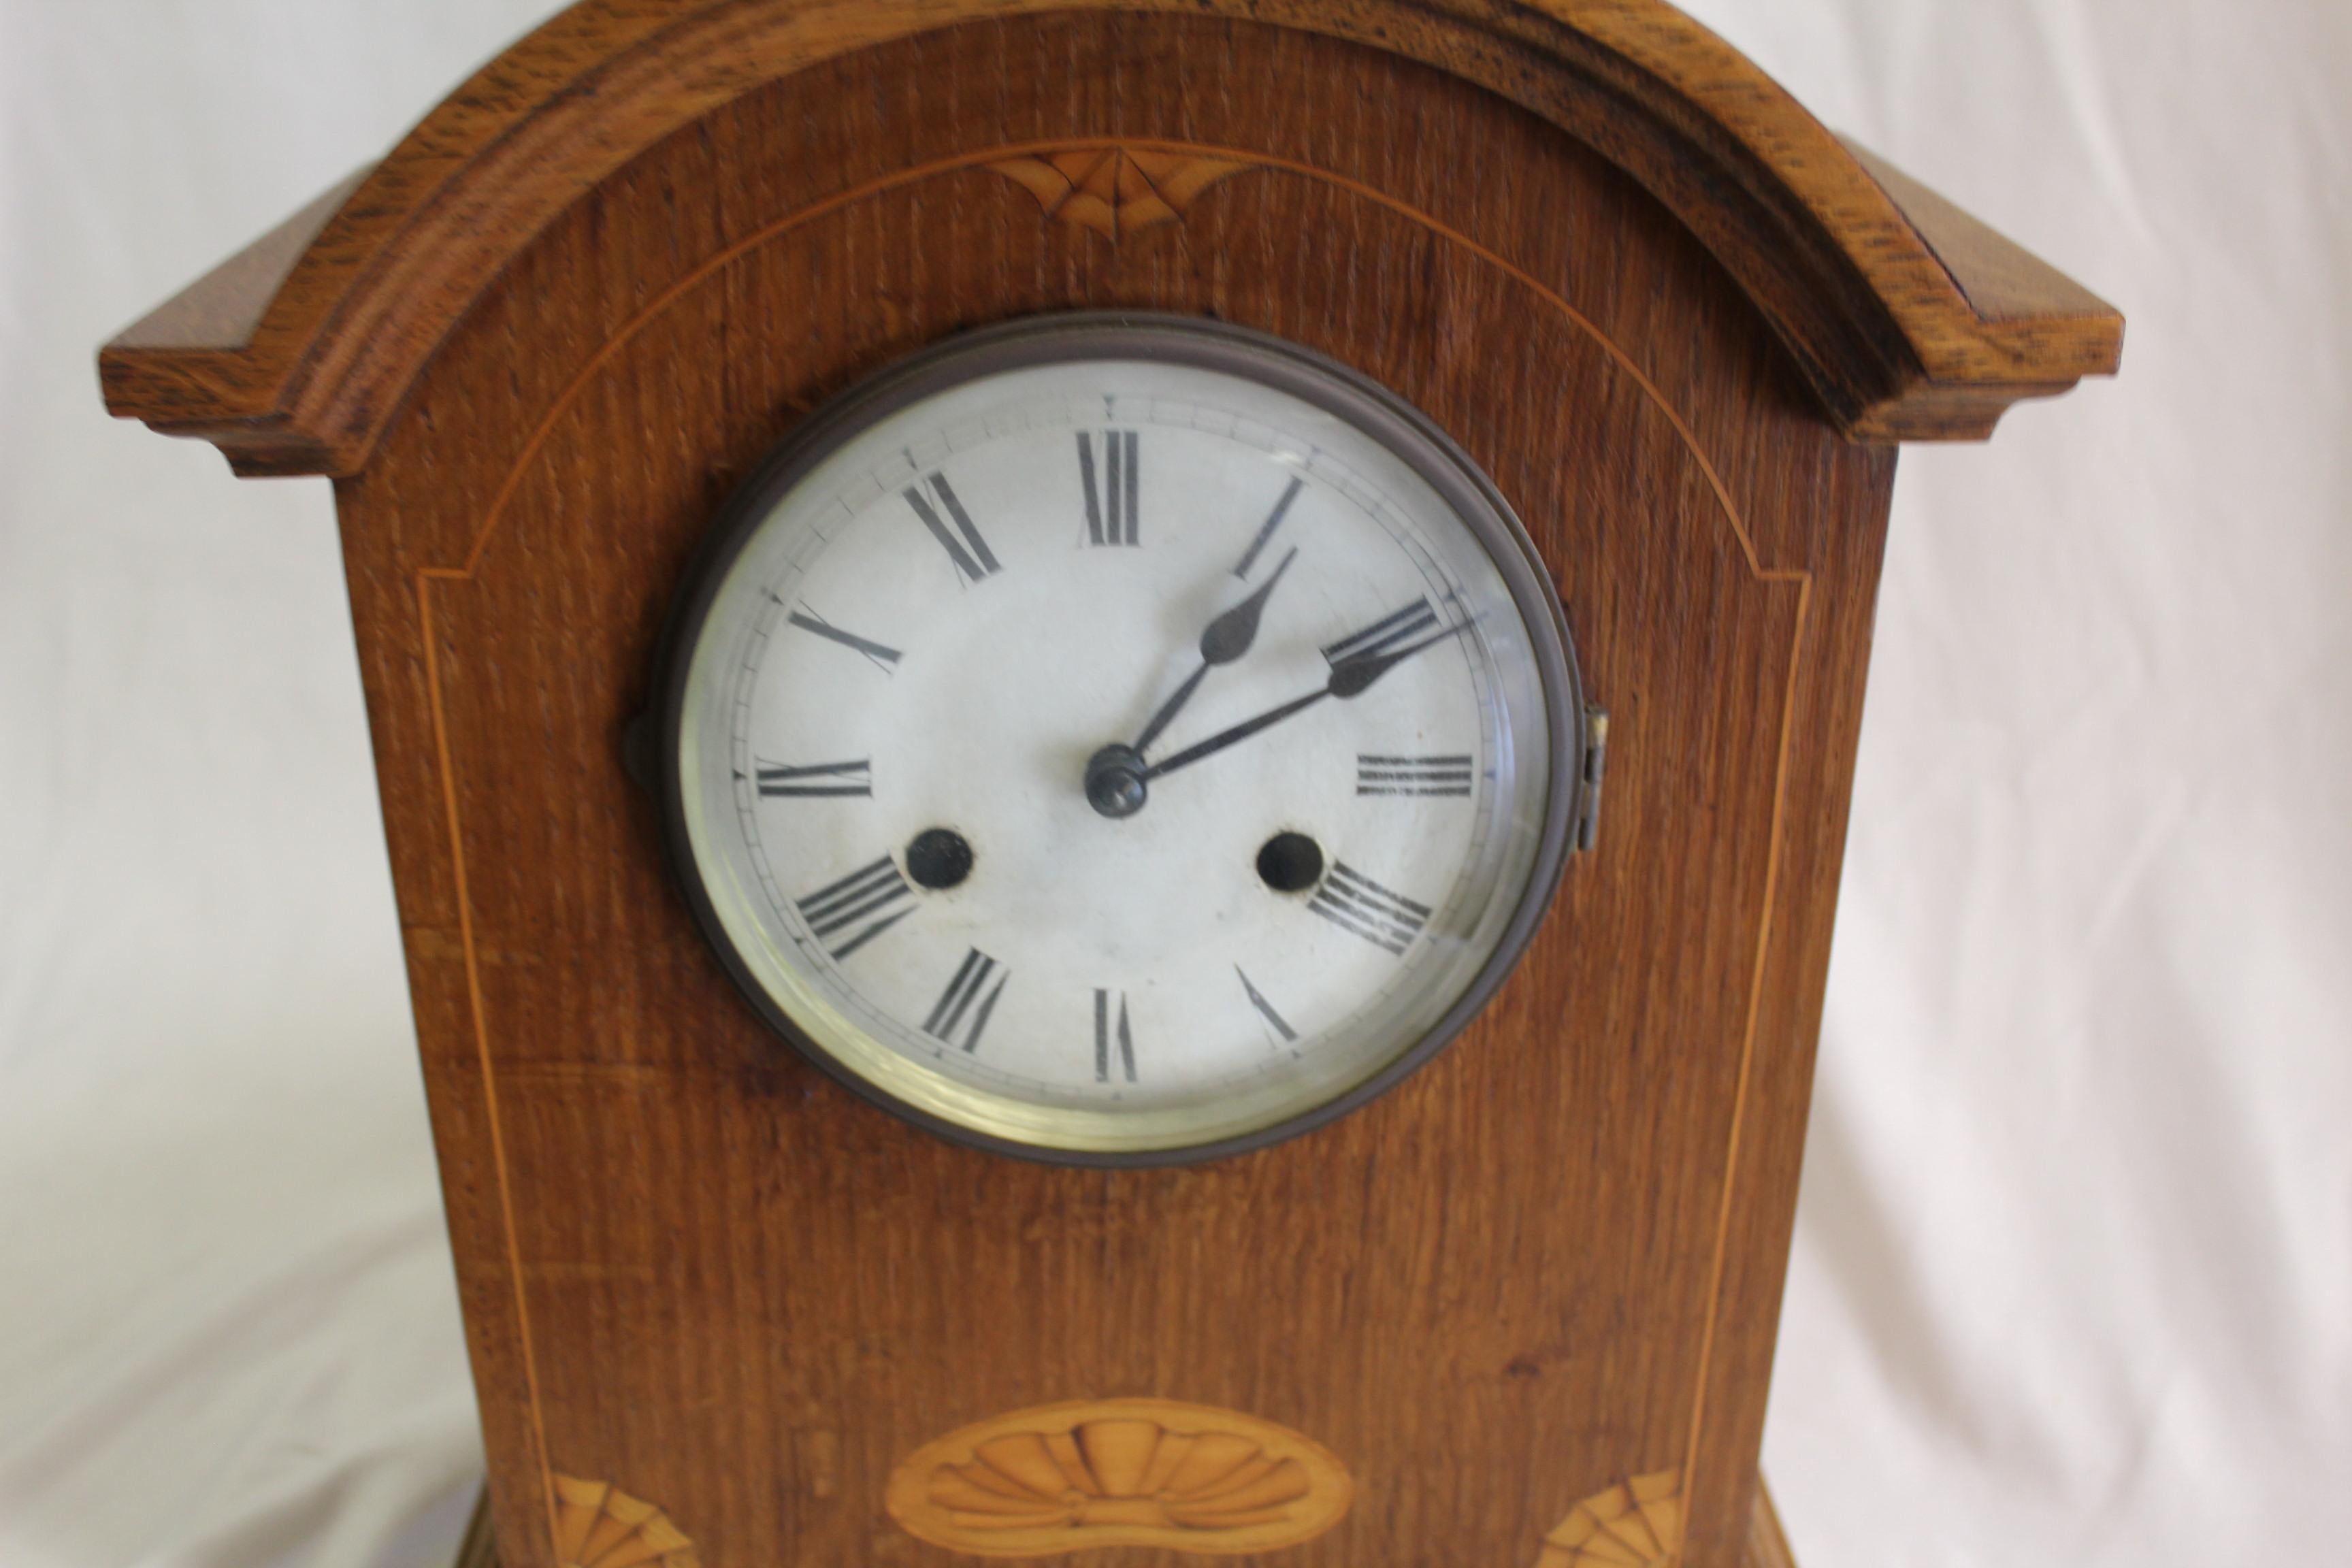 A well made Clock with Wooden case and Inlaid shell design. Has an 8 day movement and chimes. Dial is enameled and Brass ring. Pendulum is inside. No maker marks found. Did not take movement out of the case. Purchased in England 40 years ago. Keep